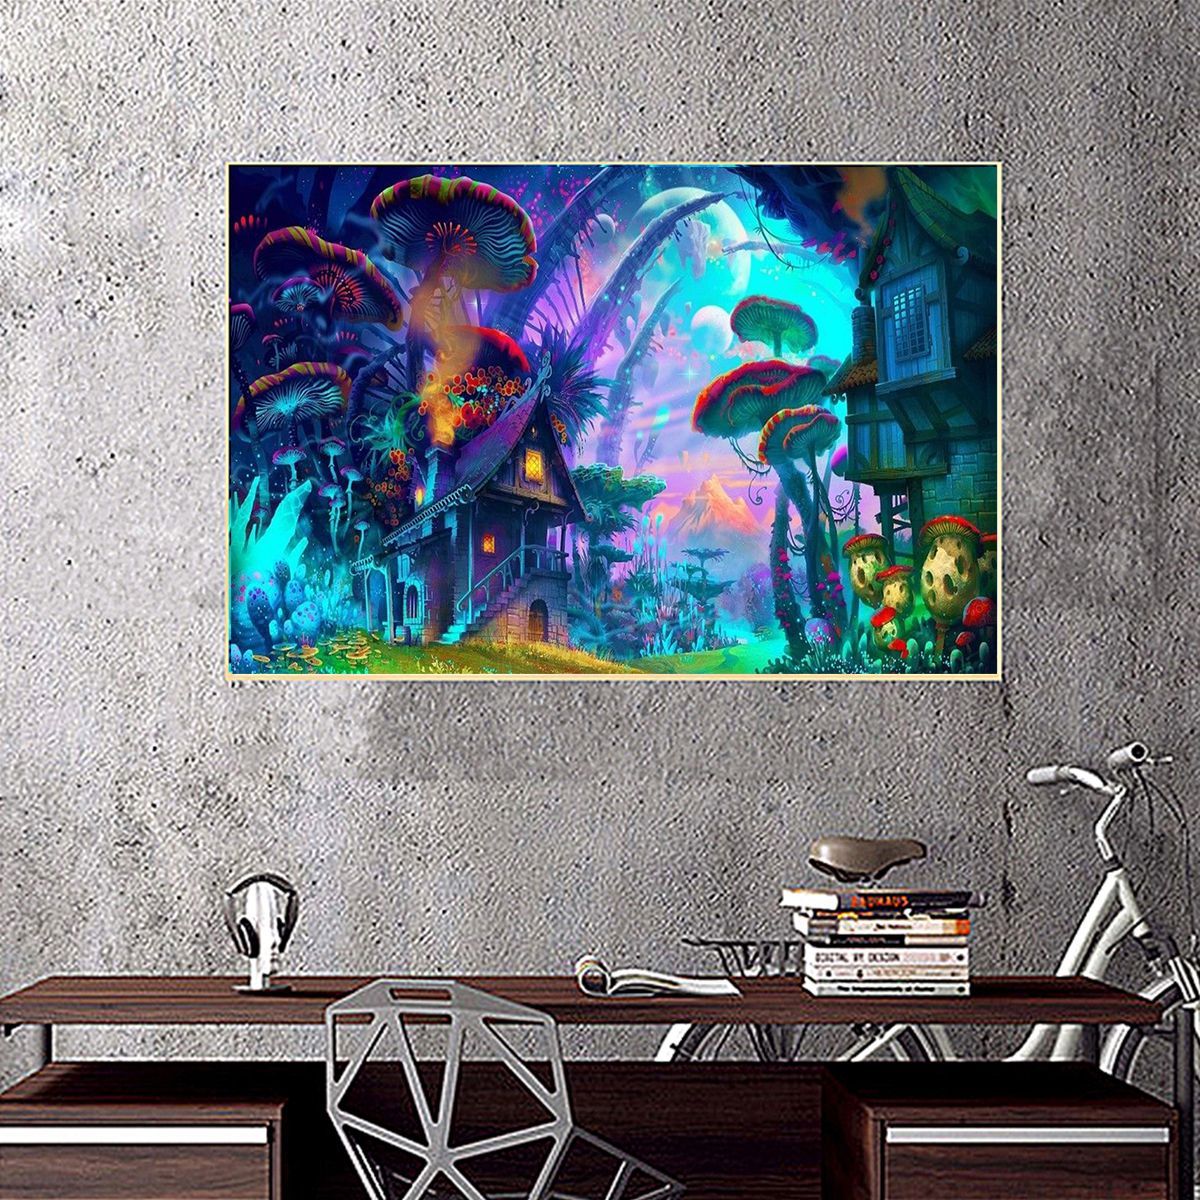 24x36-Psychedelic-Mushroom-Town-Art-Print-Fabric-Silk-Poster-Wall-Home-Decorations-1618564